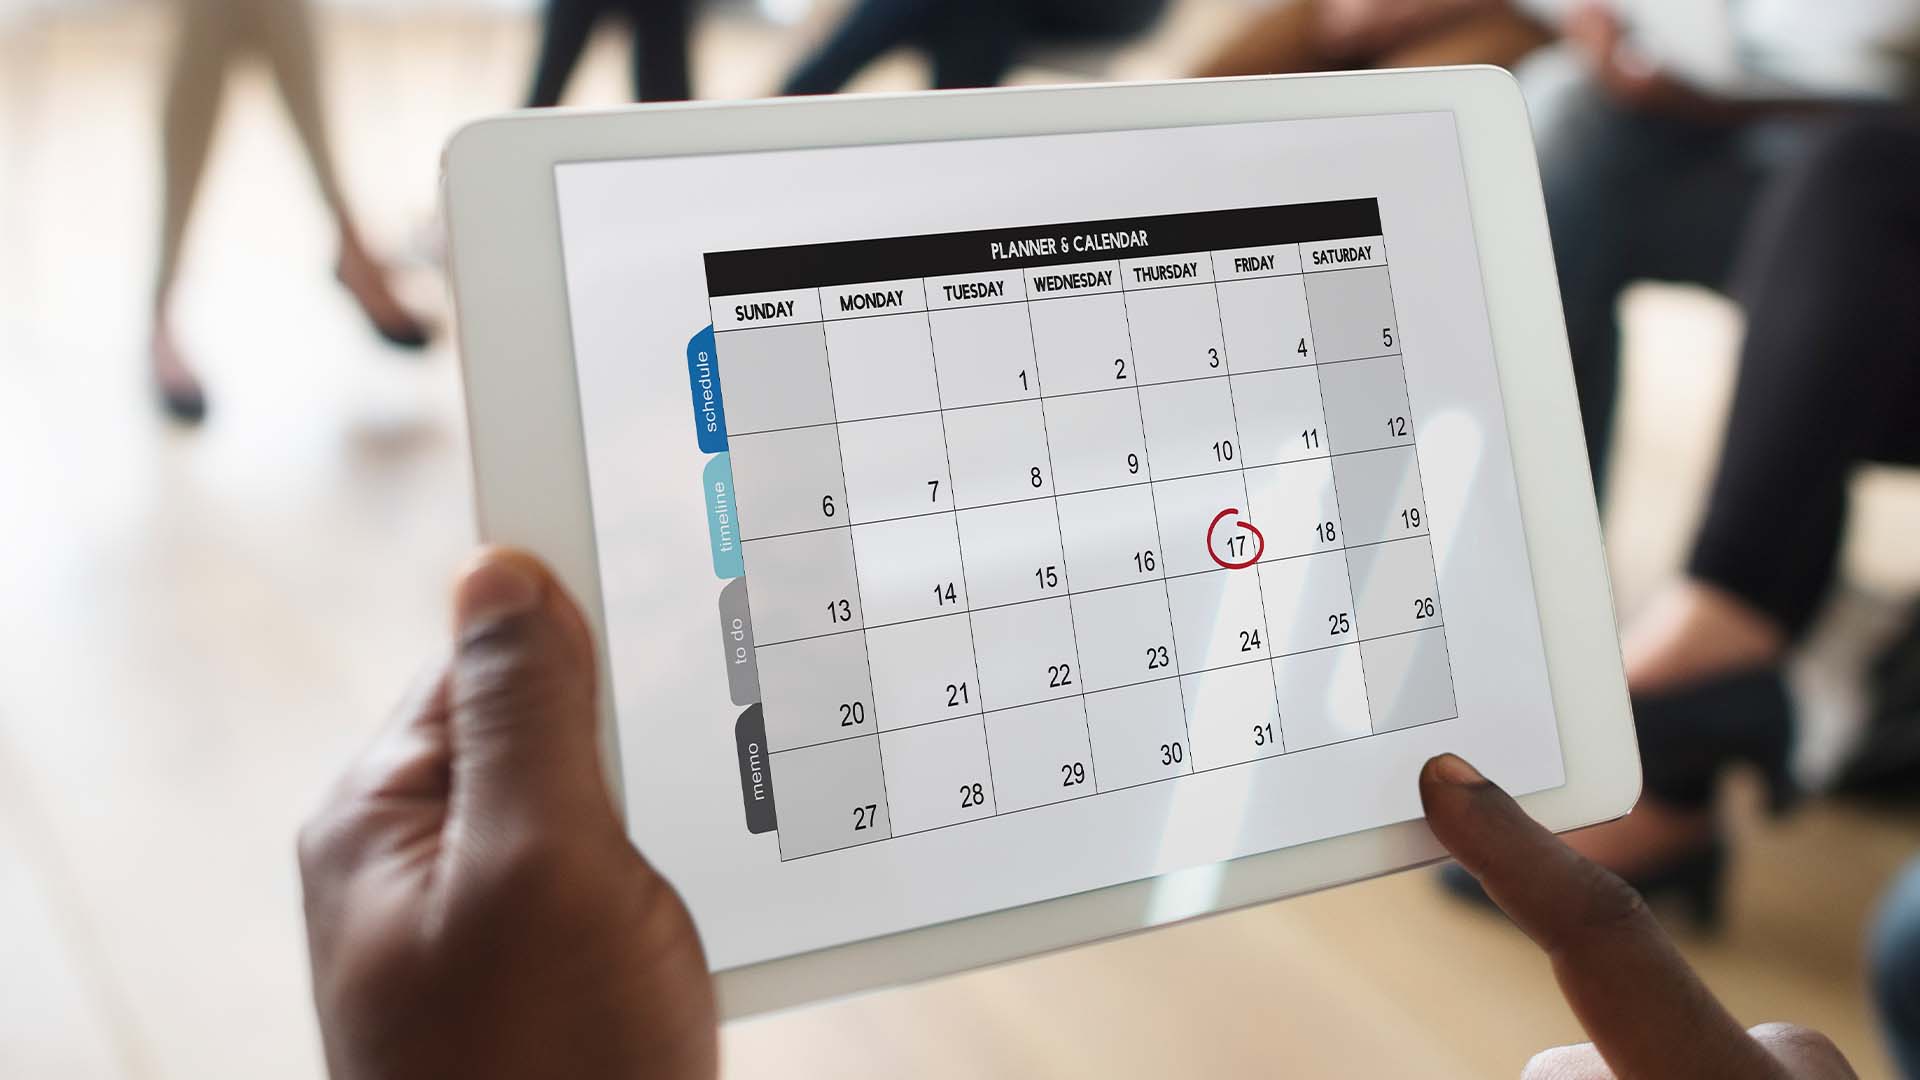 A person is holding an ipad with the calendar on it.